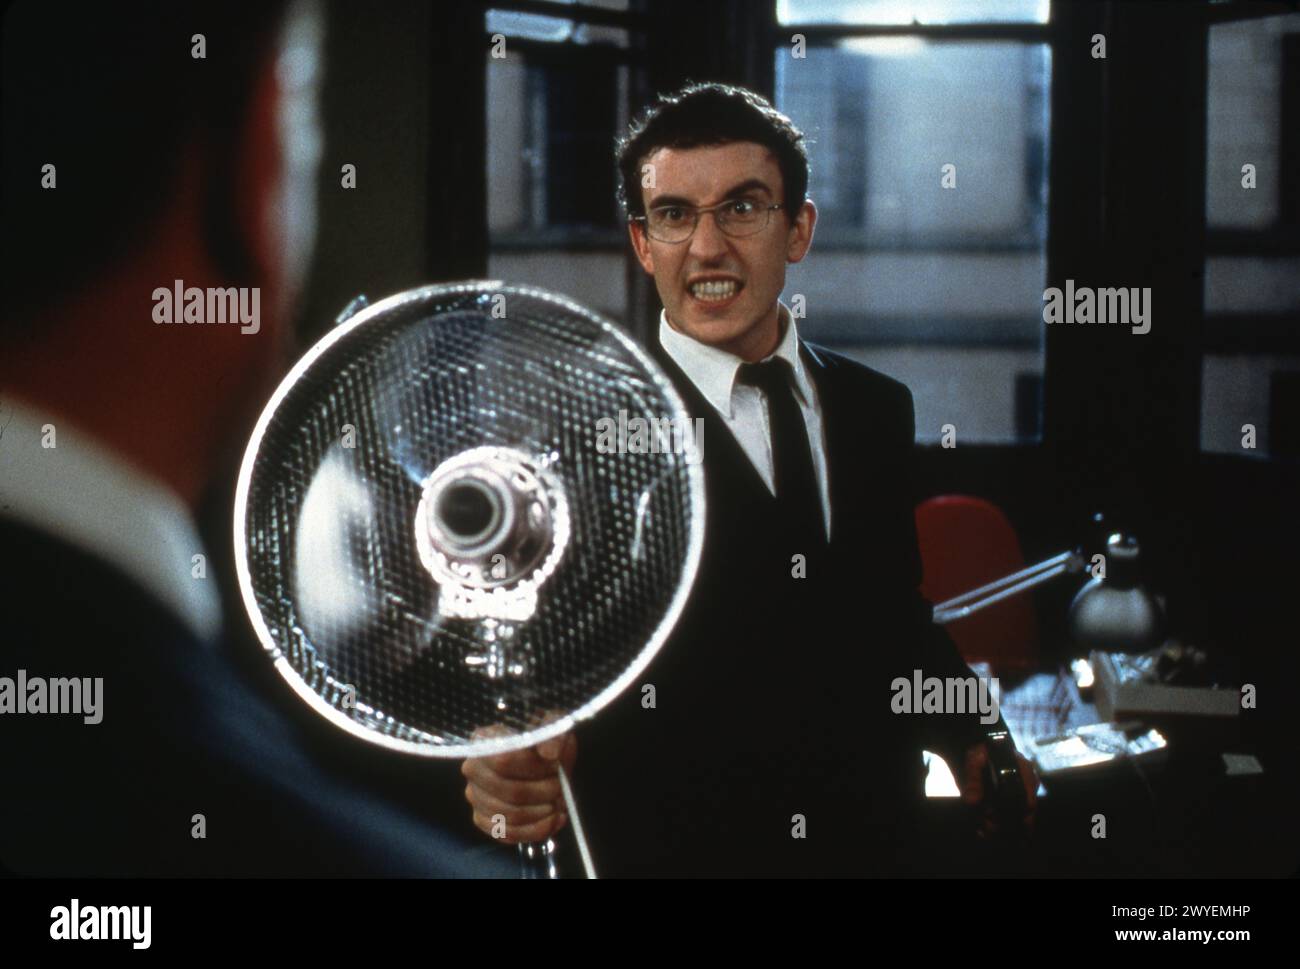 STEVE COOGAN in THE PAROLE OFFICER 2001 director JOHN DUIGAN writers Steve Coogan and Henry Normal DNA Films / Figment Films / Toledo Pictures / UK Film Council / Universal Pictures Stock Photo